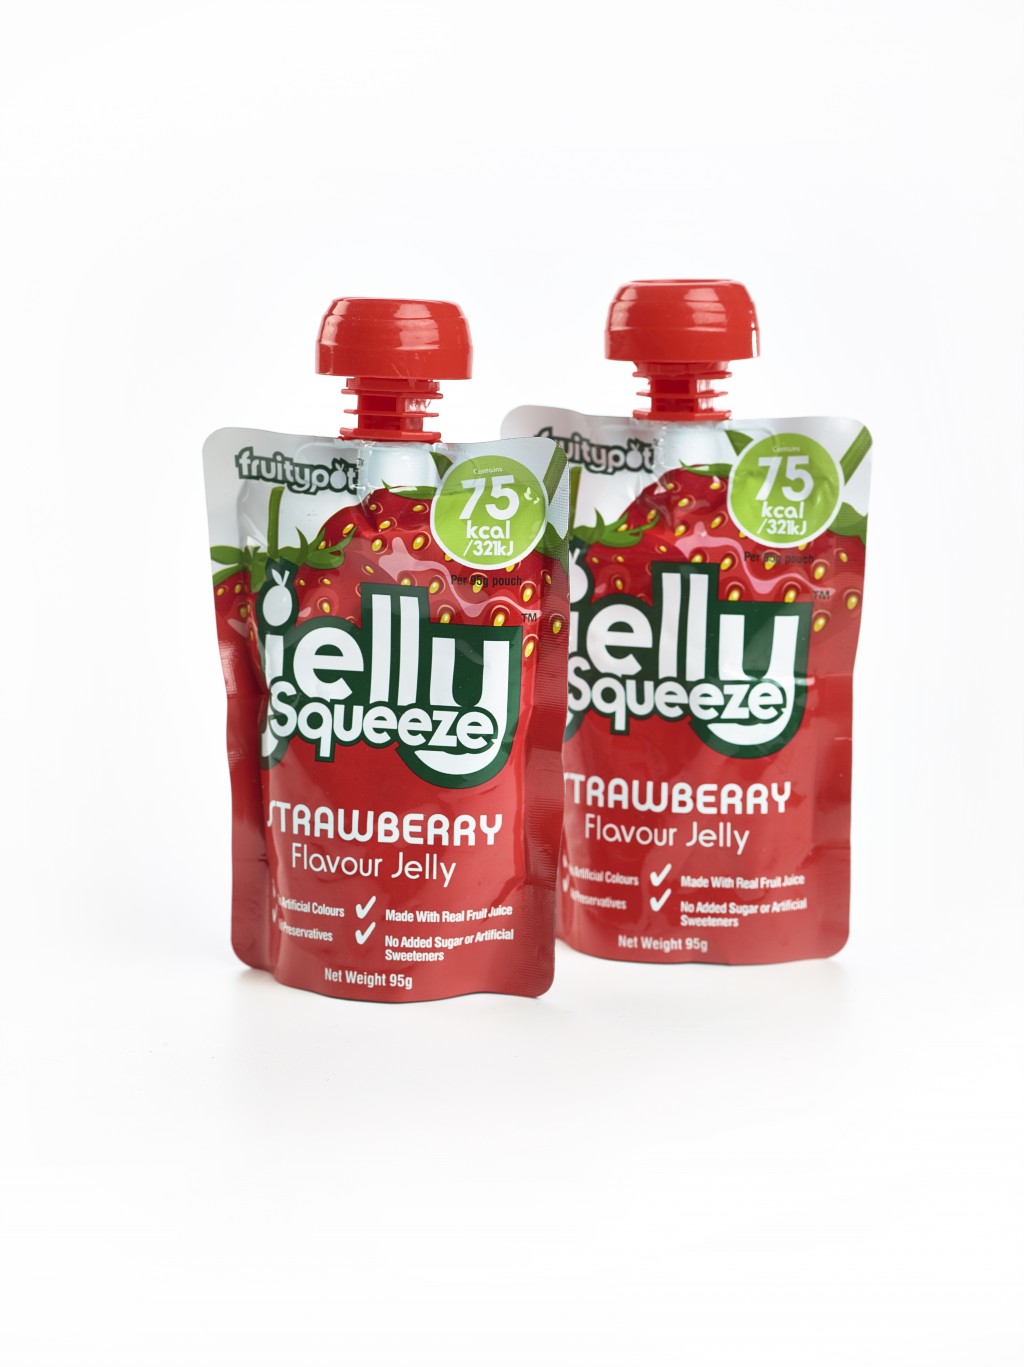 Strawberry Flavour Jelly Squeeze